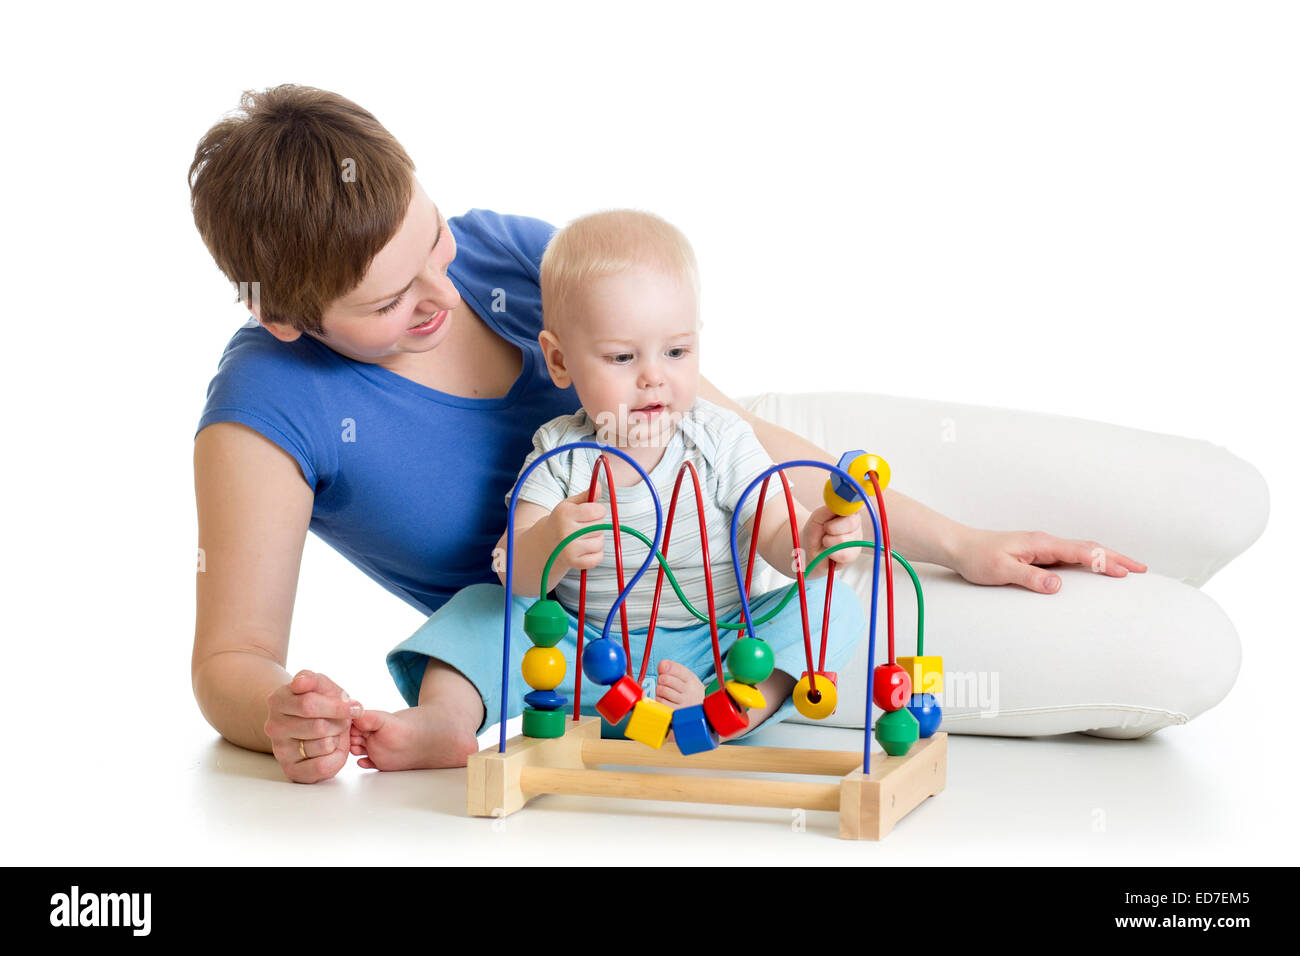 kid and mother play with educational toy Stock Photo